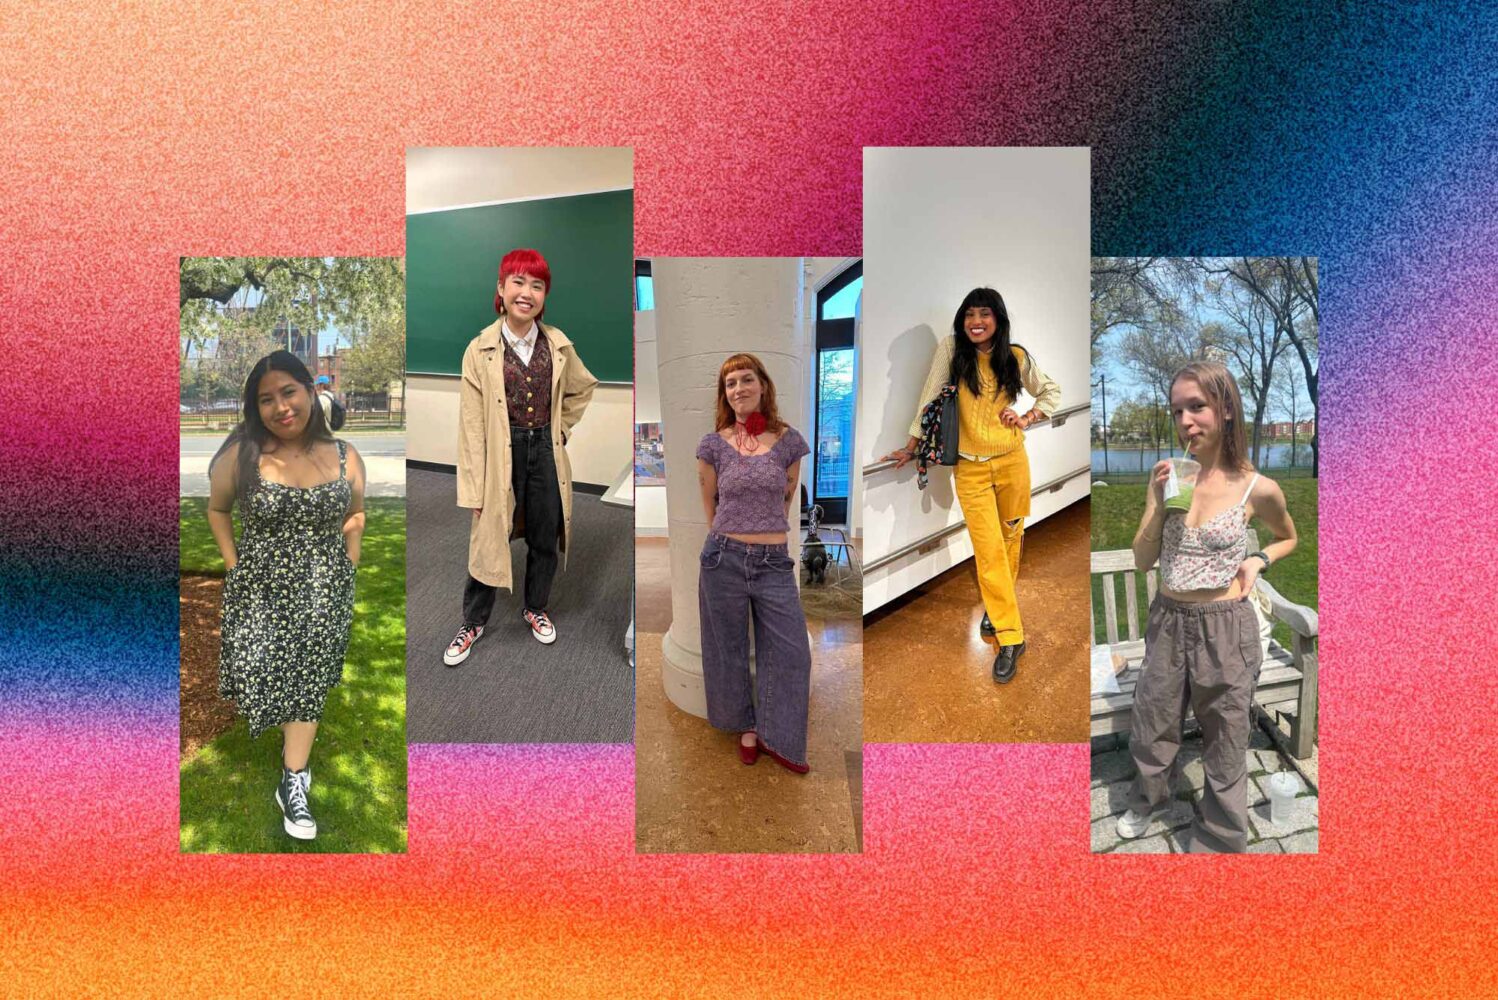 Photo: A collage of five images, each image a photo of a BU student posing to show off their outfits. The background is a multi-colored mesh of bright pinks, oranges, and blues with an added grainy overlay.